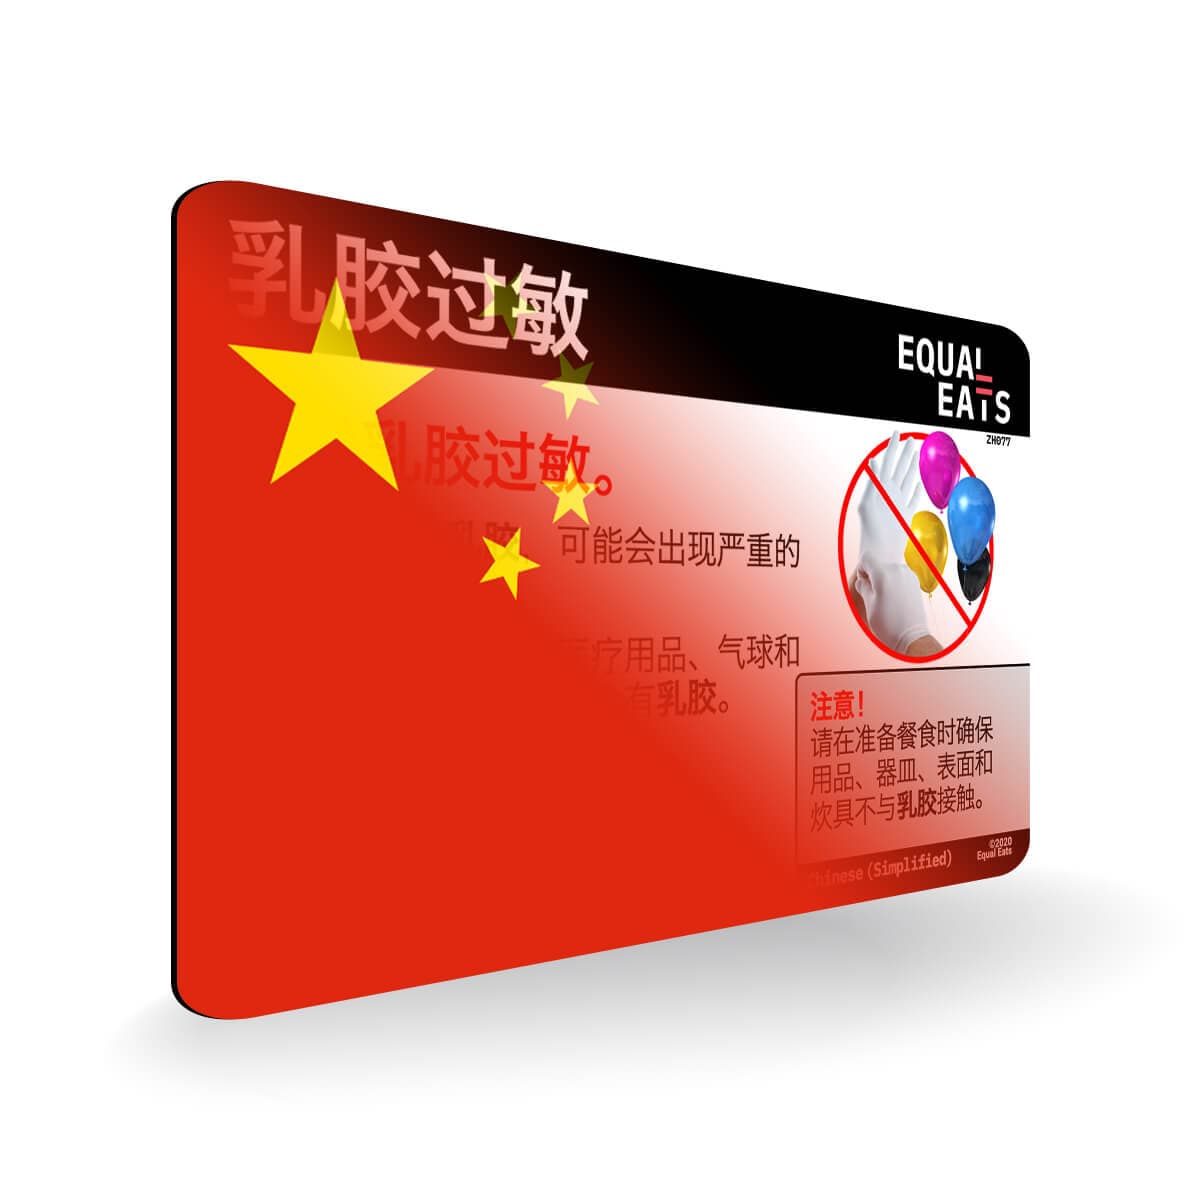 Latex Allergy in Simplified Chinese. Latex Allergy Travel Card for China